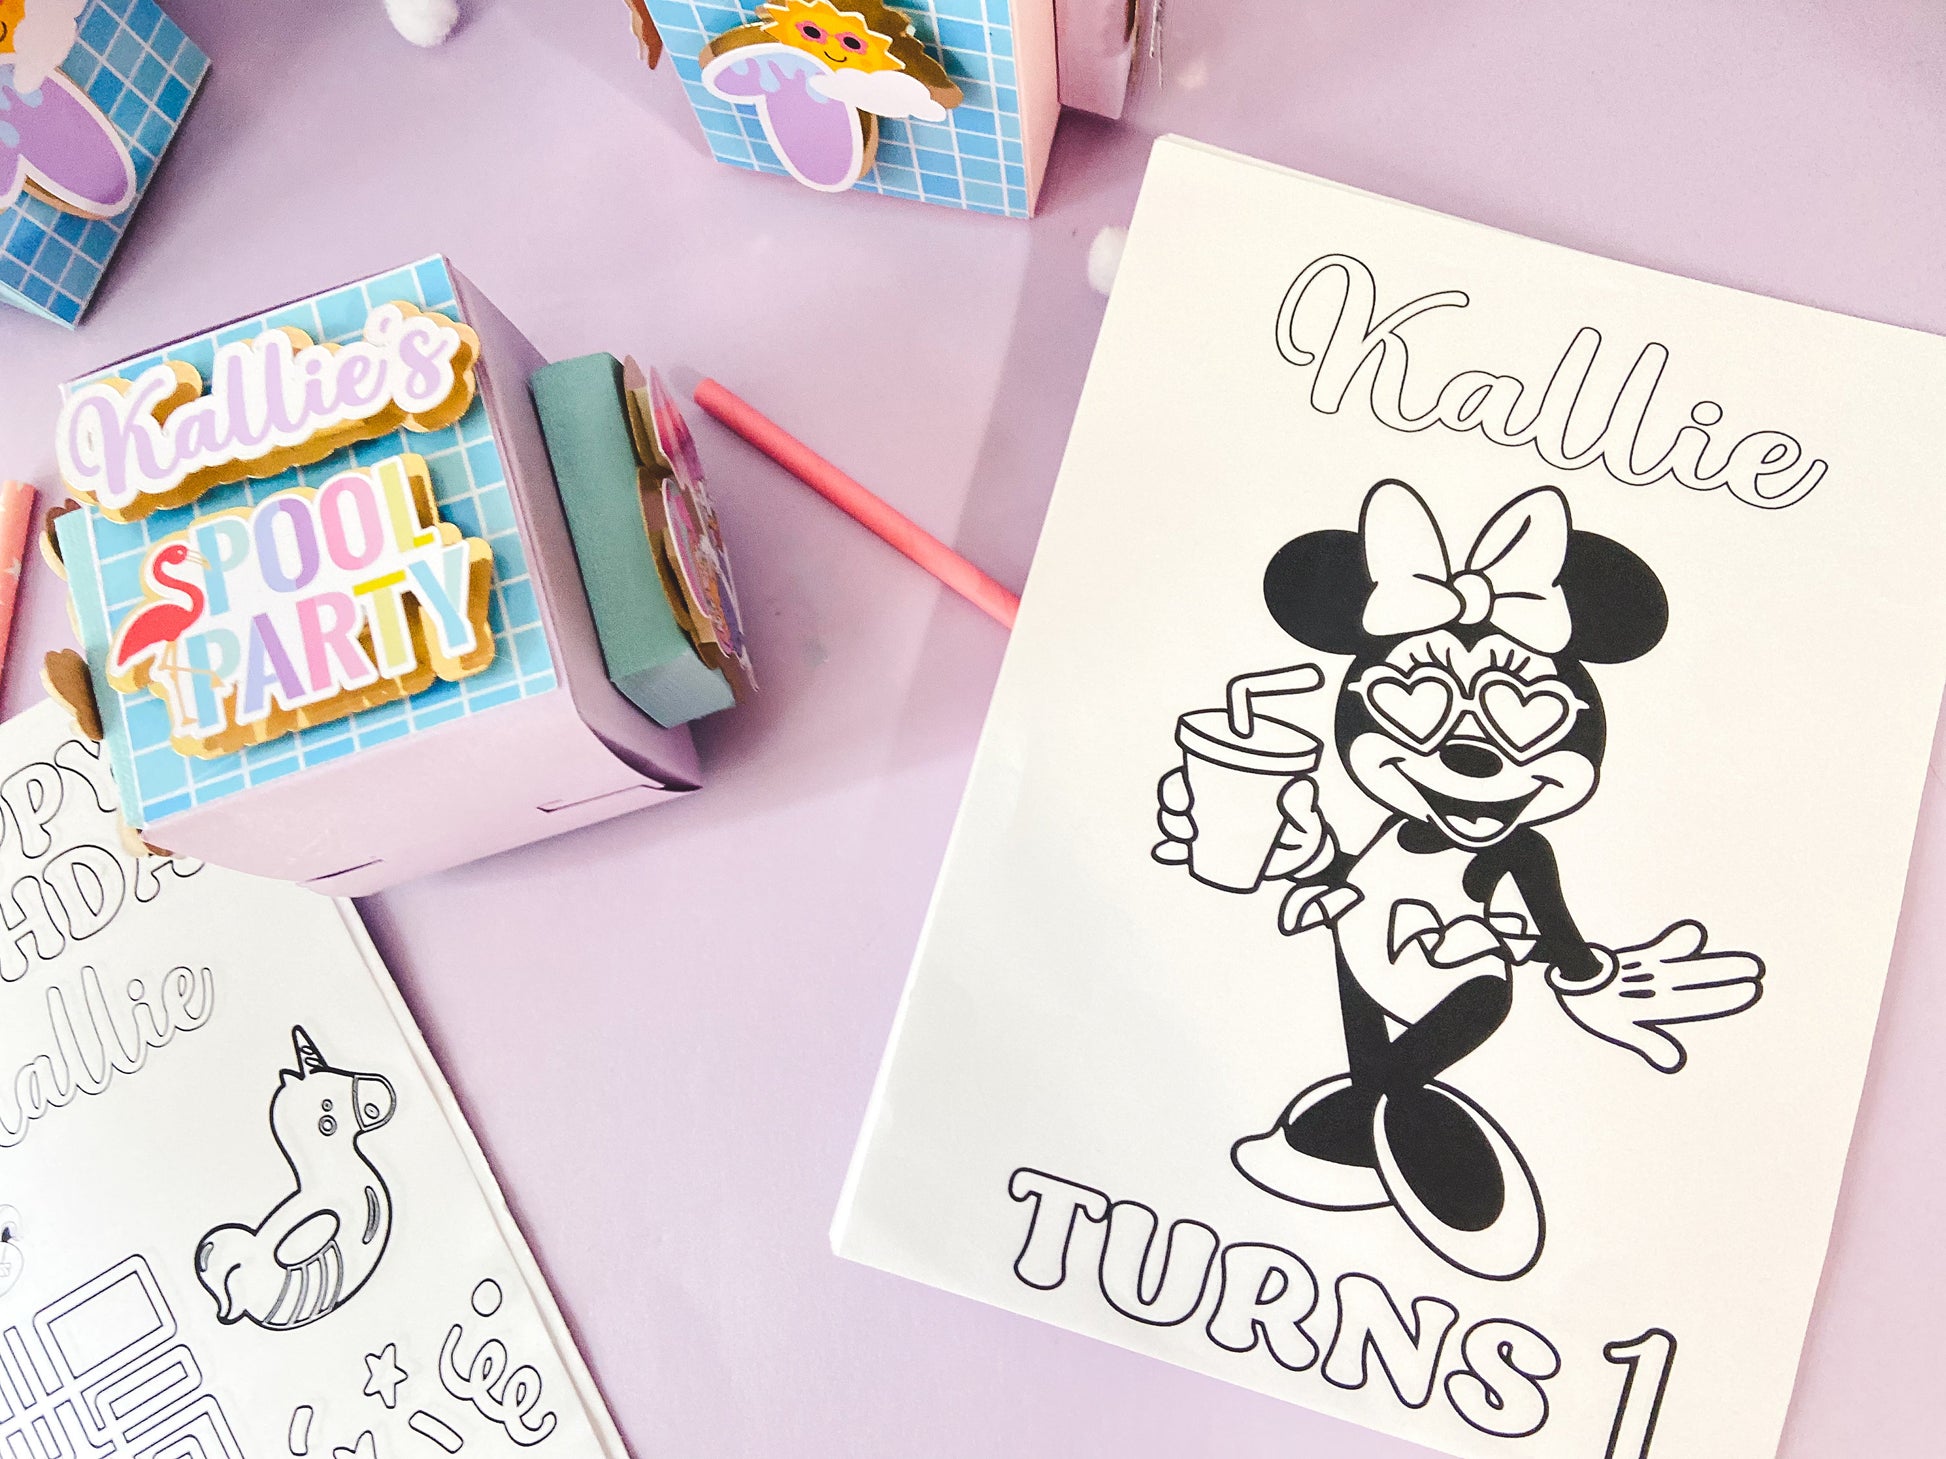 Pool 12 Coloring activity favors | kids party favors | personalized party favors | Minnie pool party | Minnie Mouse customizable favors